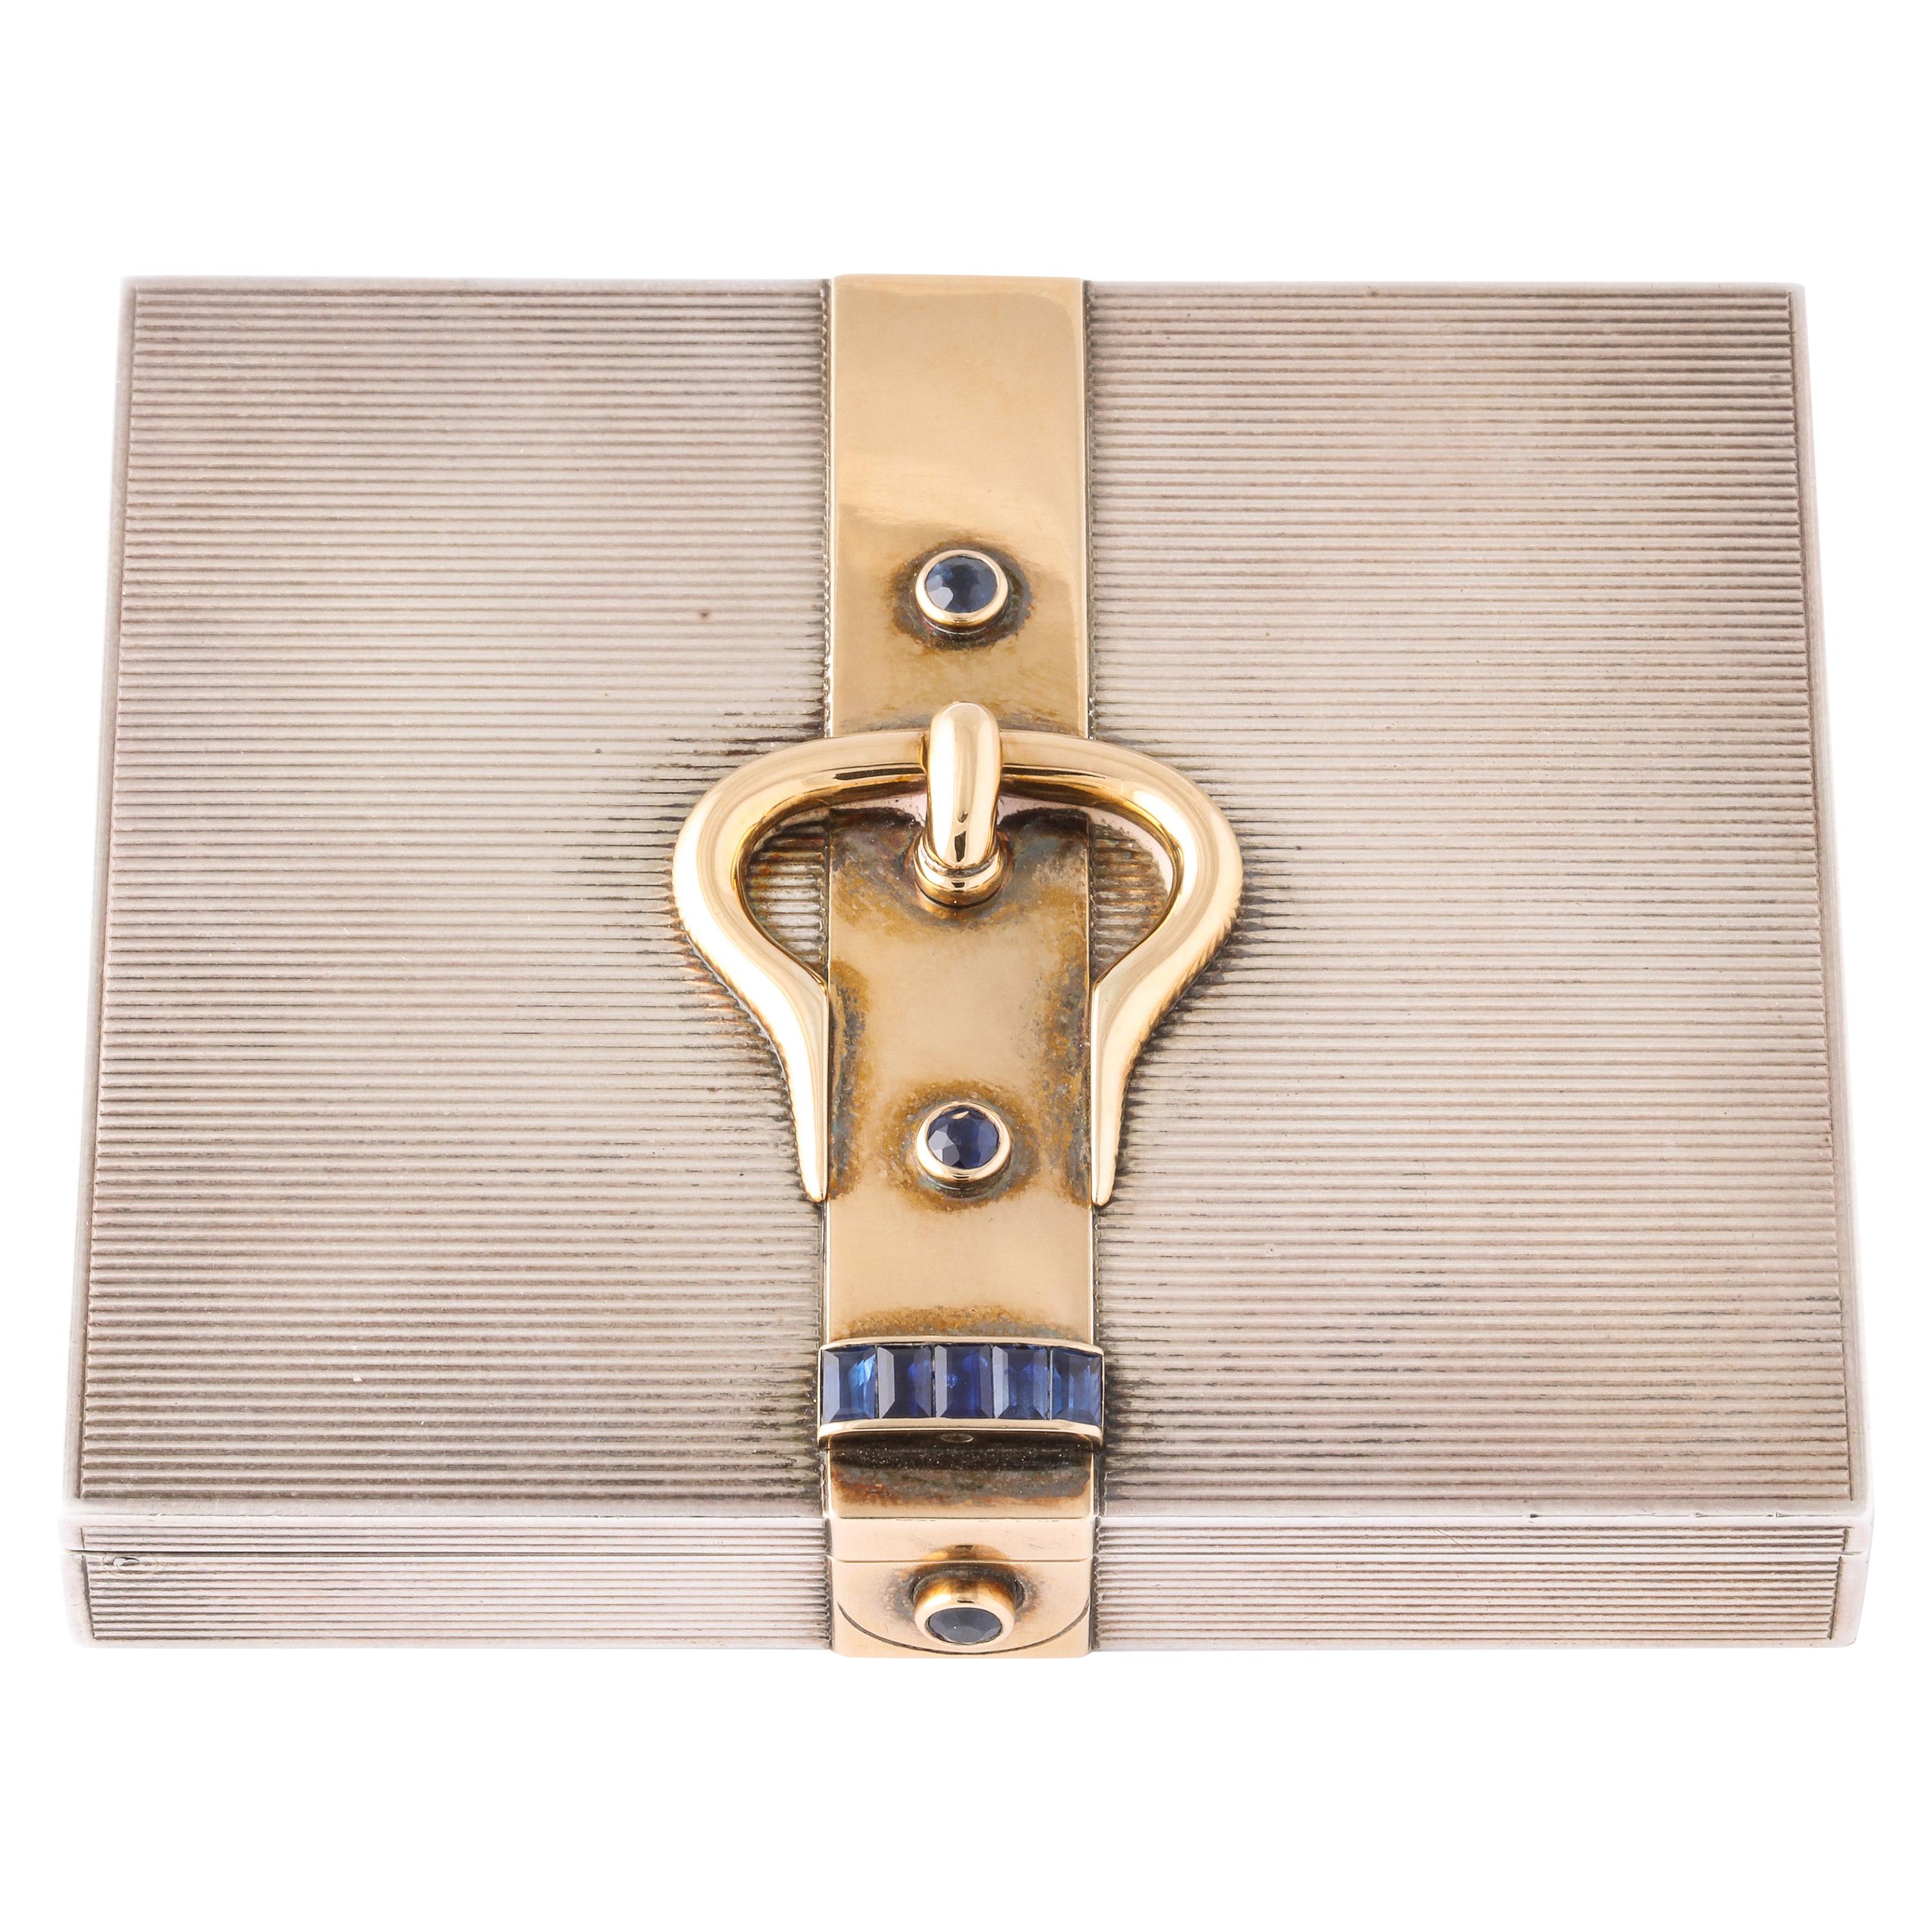 Hermès Sterling Silver and Gold Compact with Bezel and Baguette Sapphires